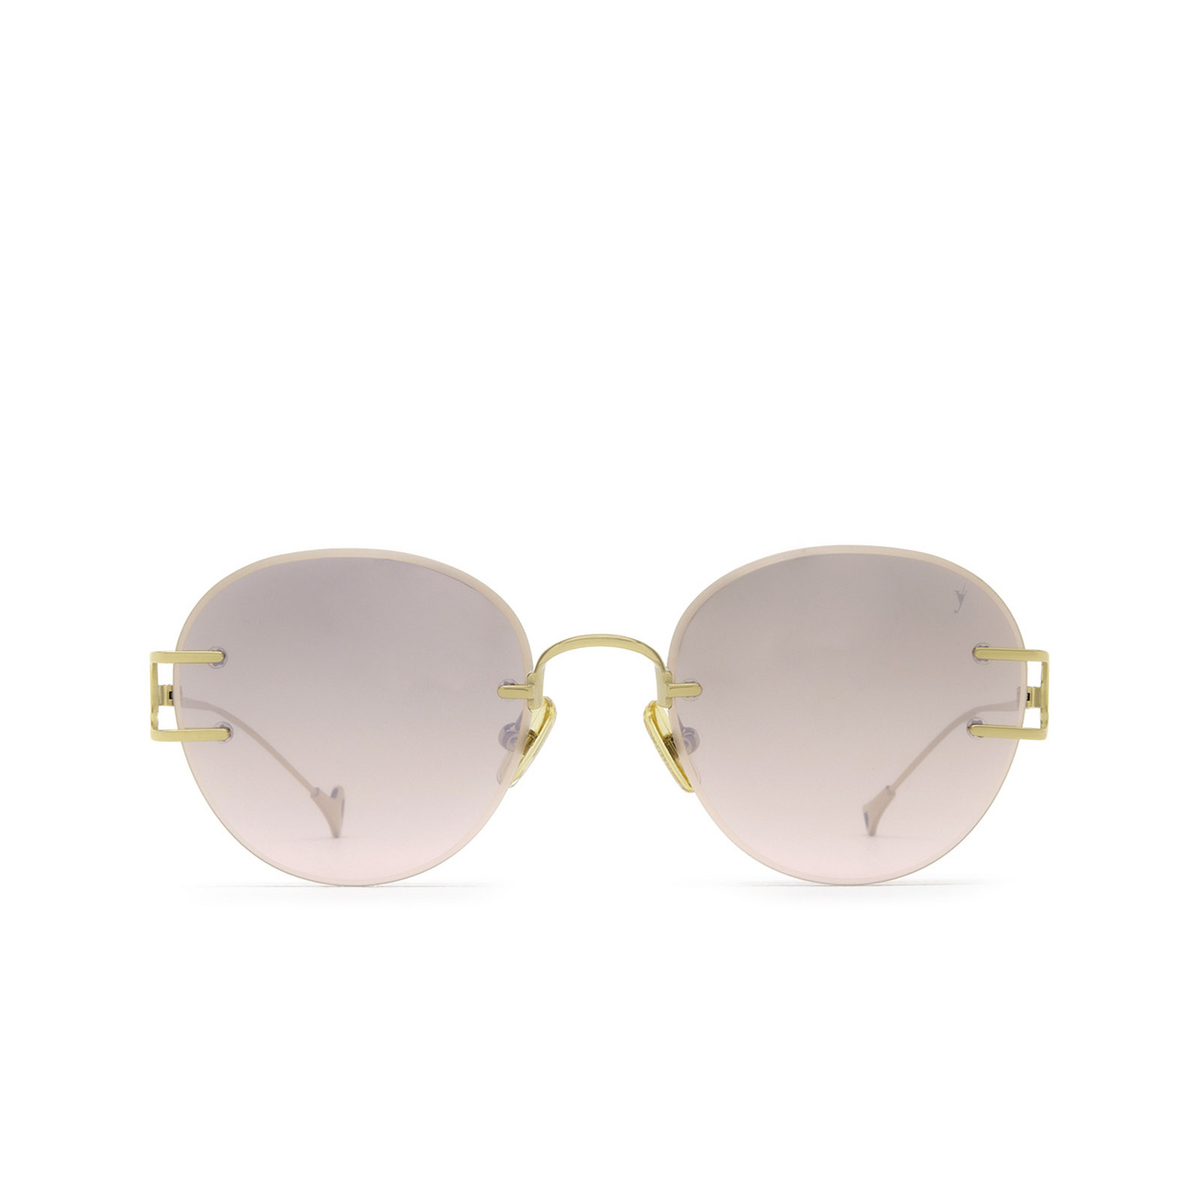 Eyepetizer® Round Sunglasses: Roy color Gold C.4-44F - front view.